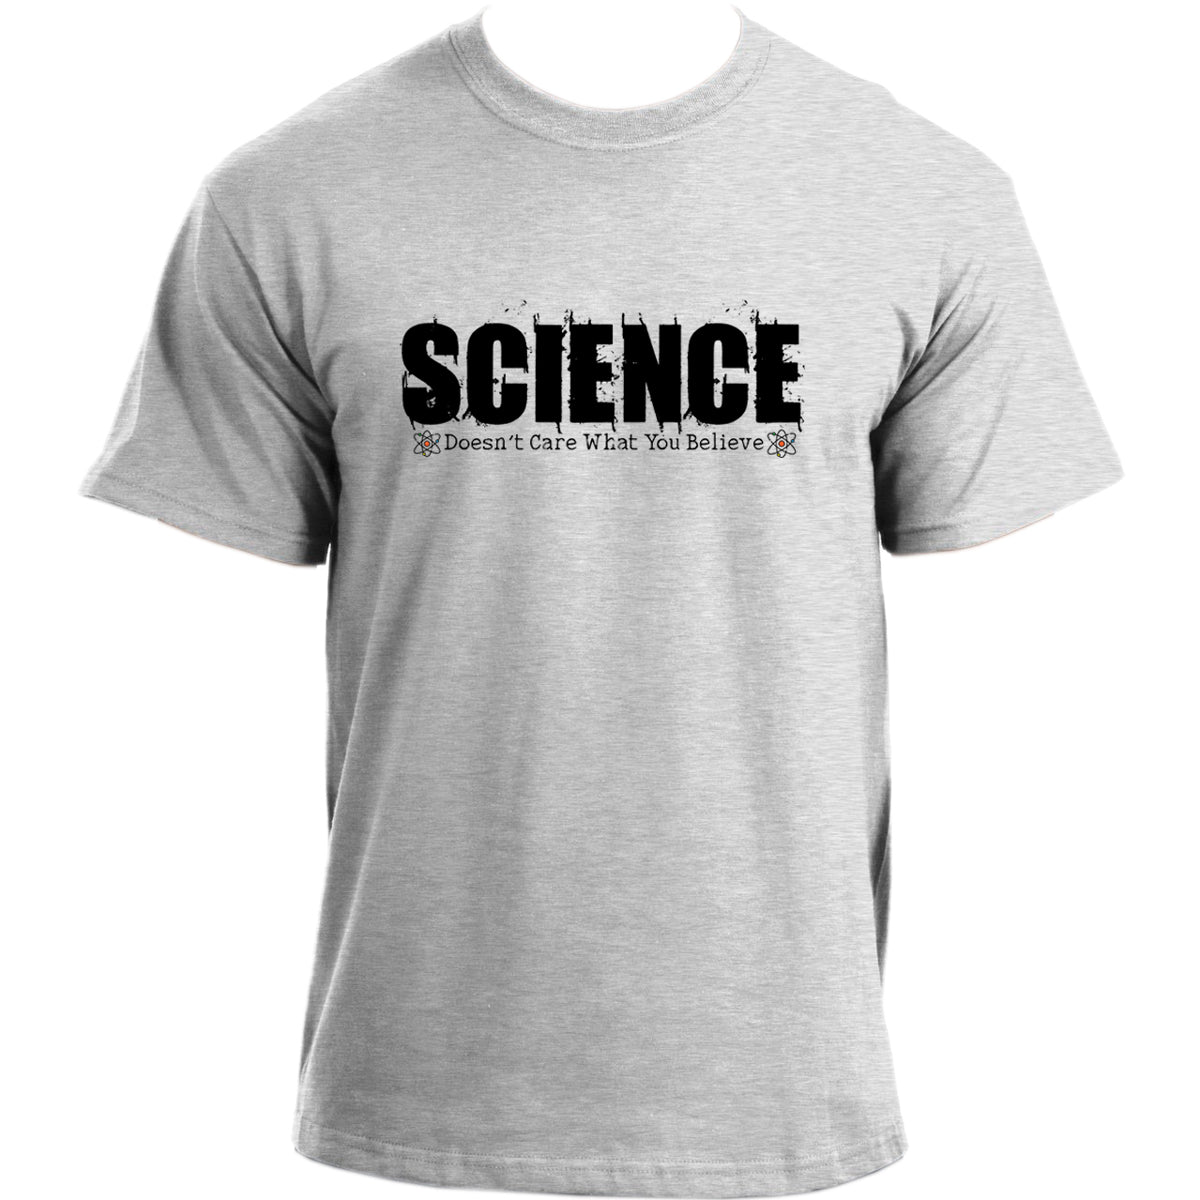 Science Doesn't Care What You Believe T Shirt I Nerd Geek Chemistry Math Physics T-Shirt